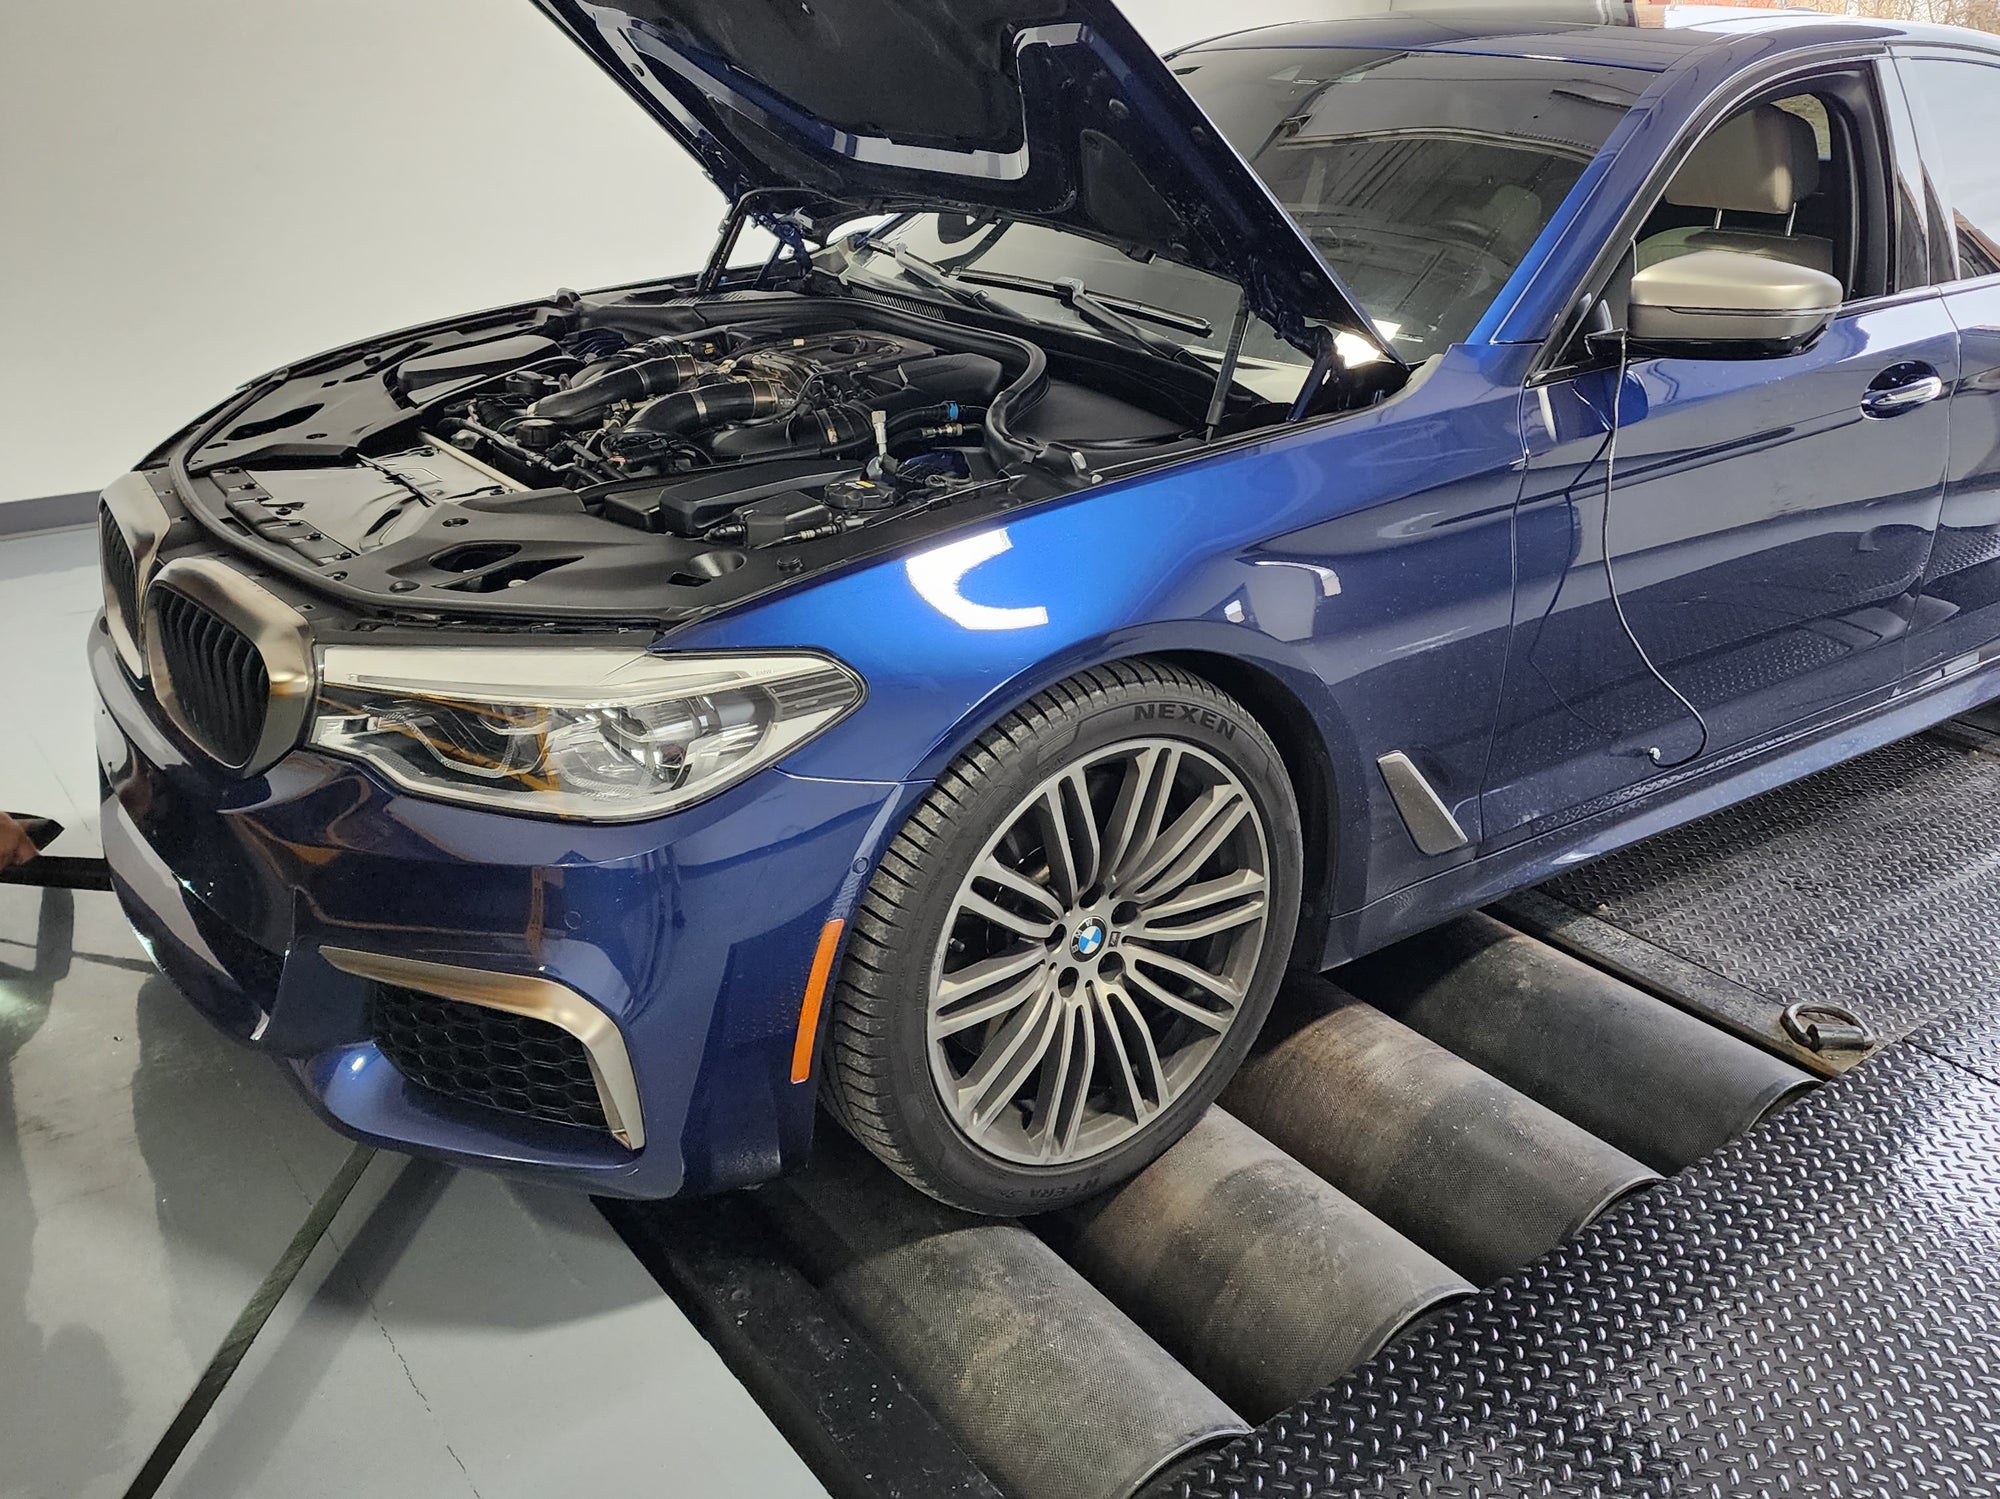 M550 Dyno and Performance Numbers